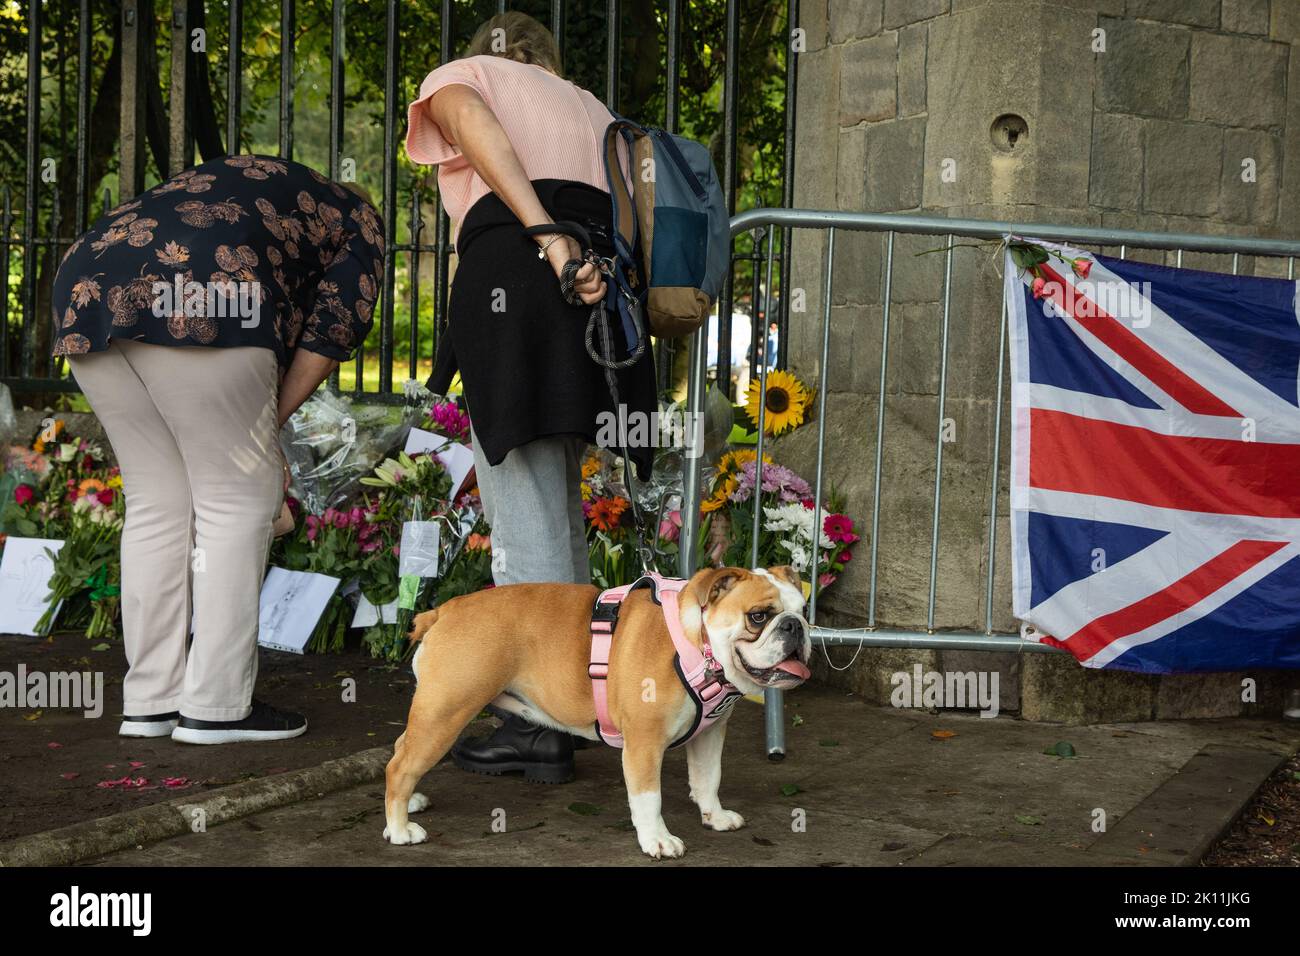 Windsor, UK. 14th September, 2022. Mourners with a bulldog lay floral tributes to Queen Elizabeth II at Cambridge Gate outside Windsor Castle. Queen Elizabeth II, the UK's longest-serving monarch, died at Balmoral aged 96 on 8th September after a reign lasting 70 years and will be buried in the King George VI memorial chapel in Windsor following a state funeral in Westminster Abbey on 19th September. Credit: Mark Kerrison/Alamy Live News Stock Photo